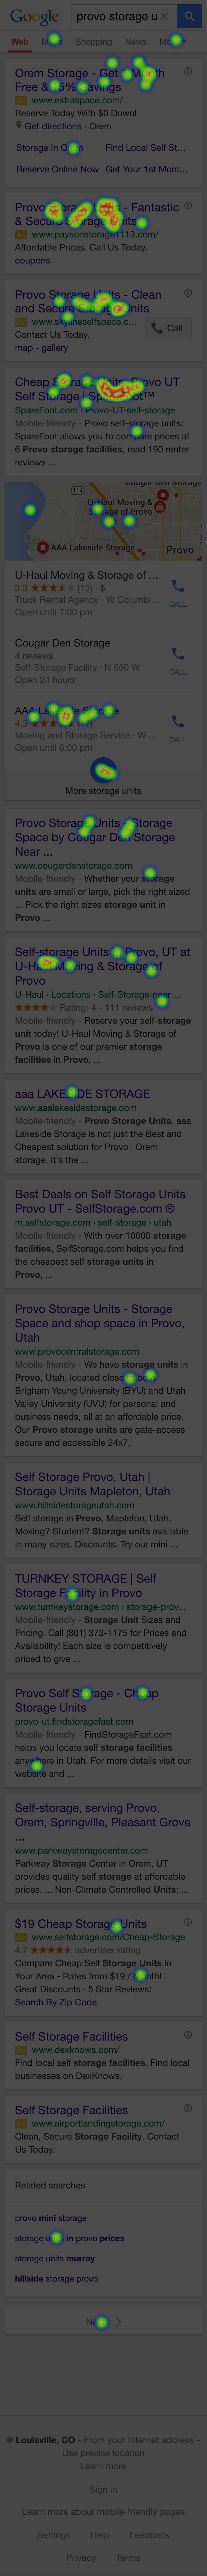 Provo Storage Unit Mobile • Test Results ⋅ UsabilityHub